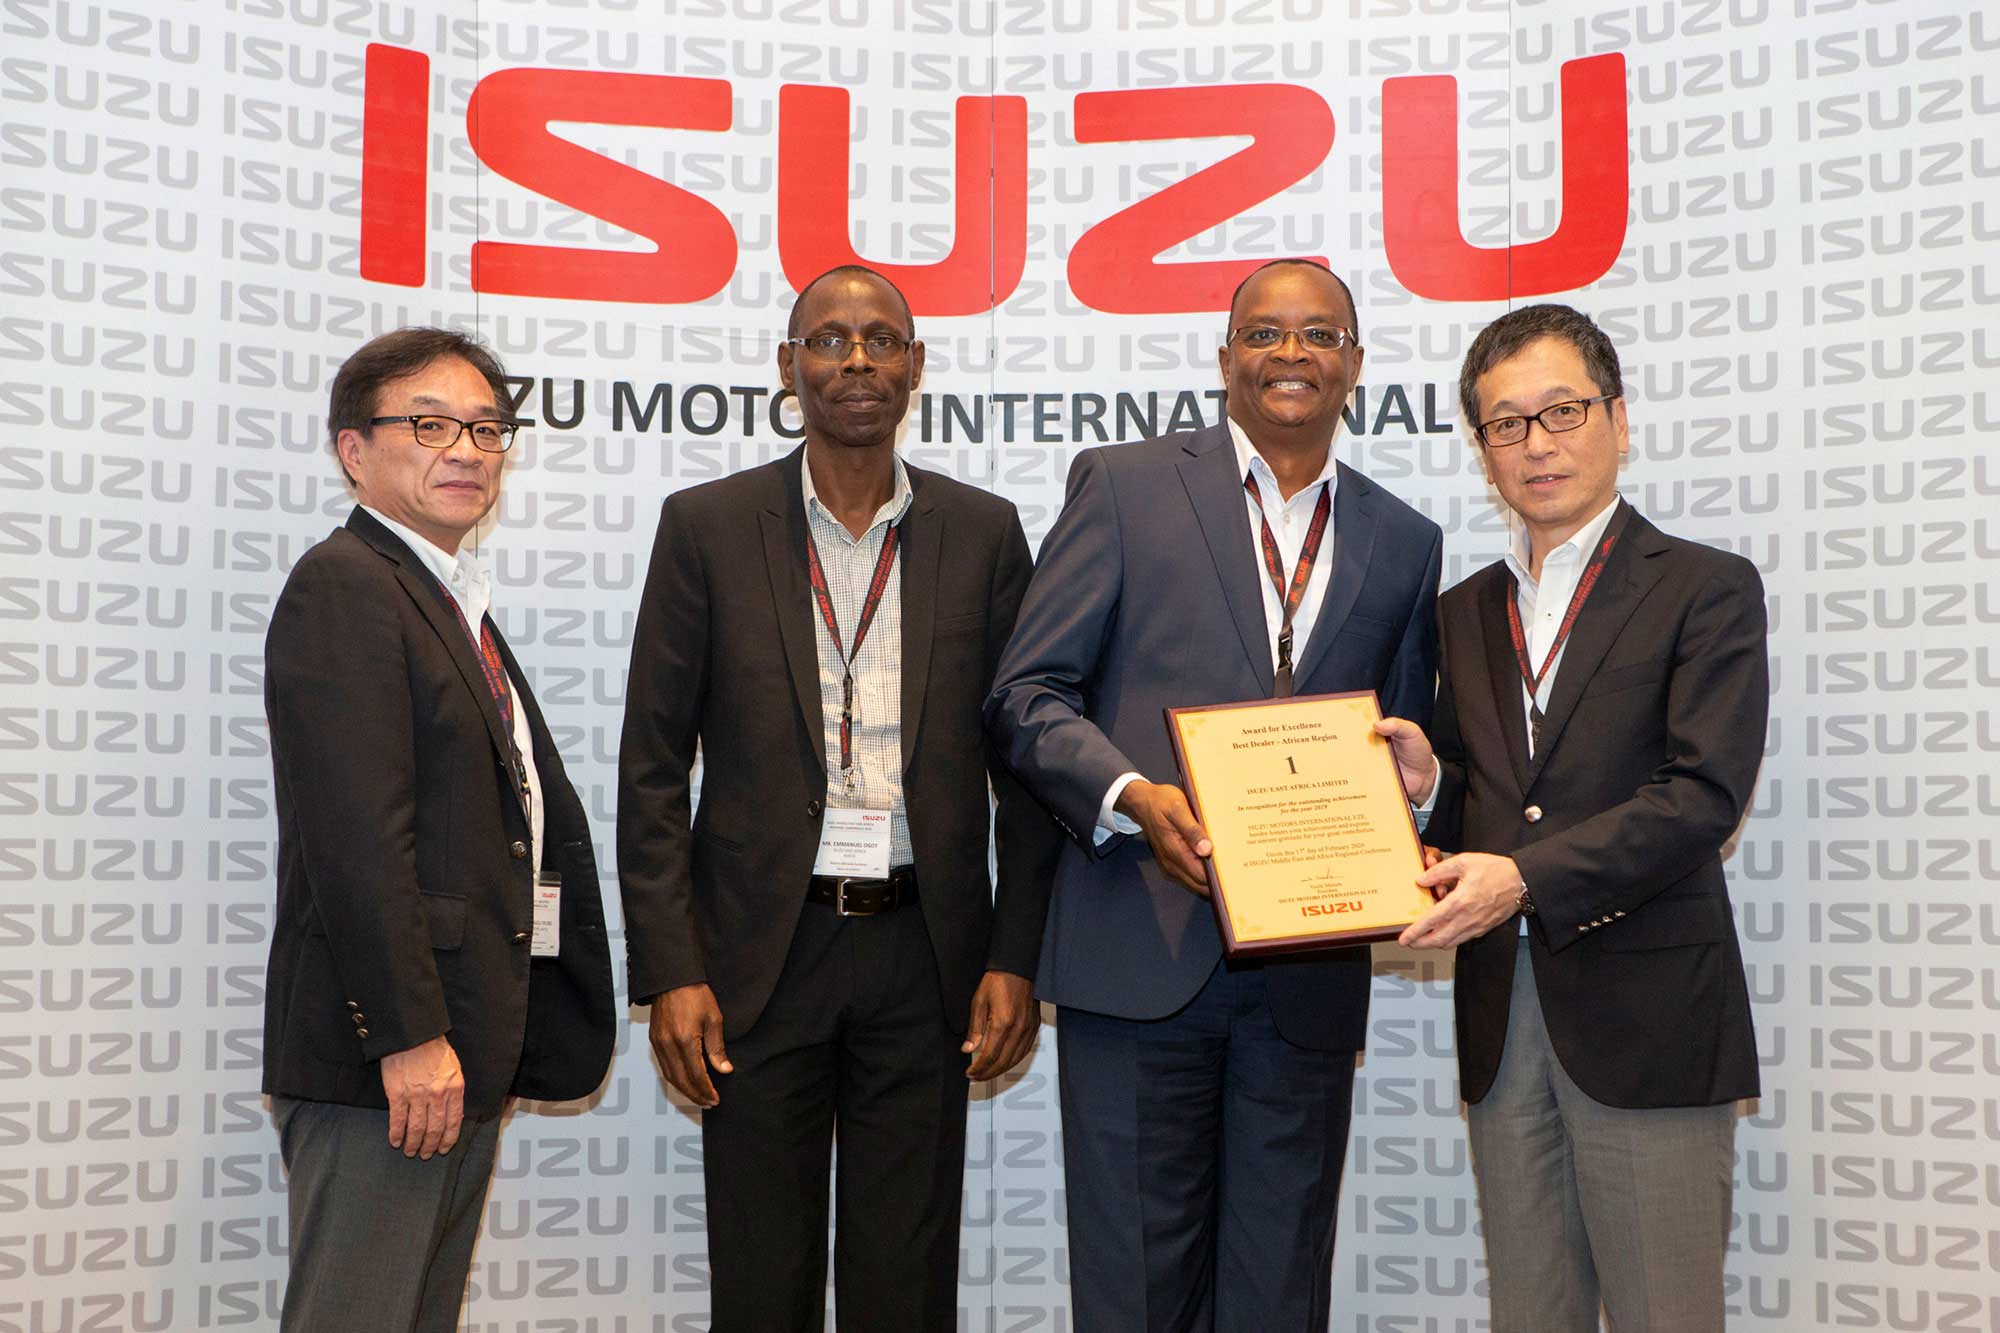 Isuzu Middle East and Africa Regional Conference 2020 Awarding of Plaques